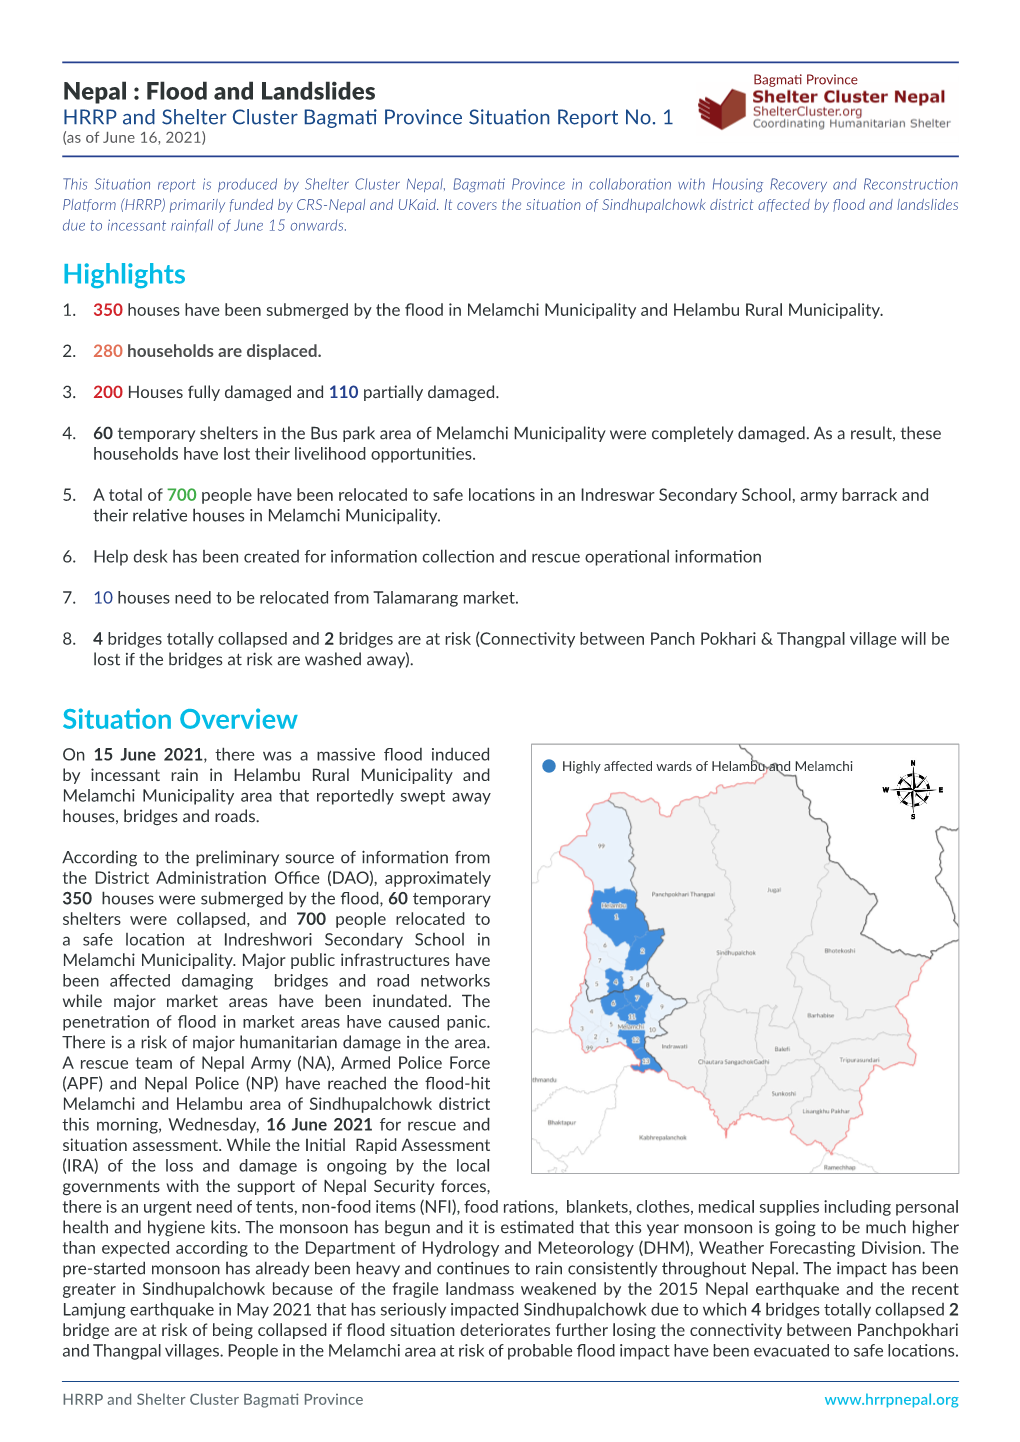 Nepal : Flood and Landslides HRRP and Shelter Cluster Bagmati Province Situation Report No